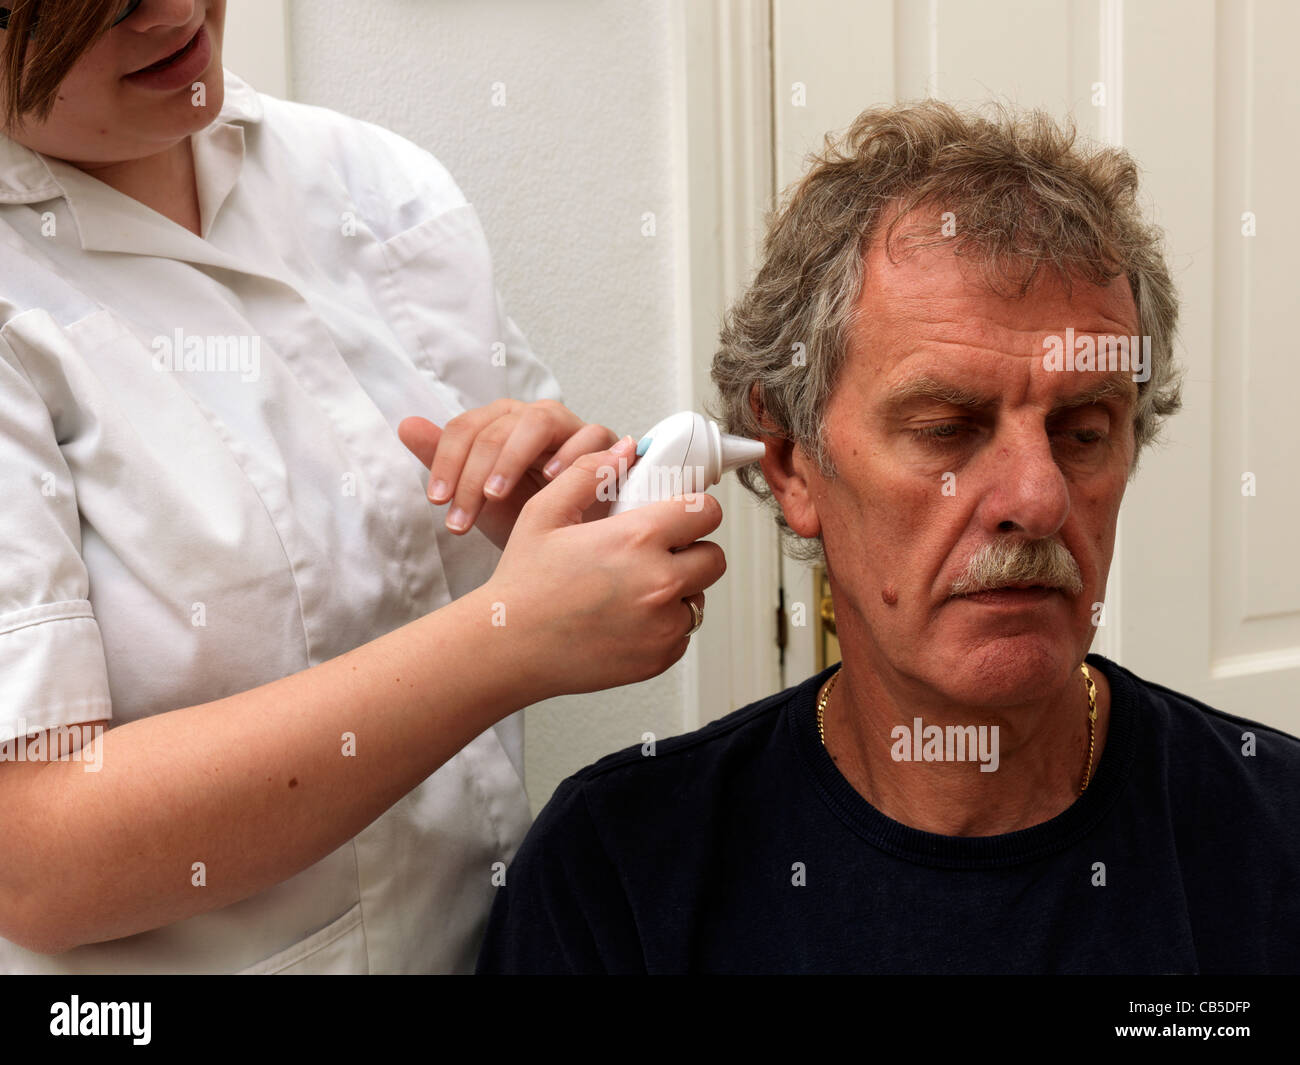 A Nurse Placing Tympanic Thermometer In A Patient's Ear Taking His Temperature Stock Photo